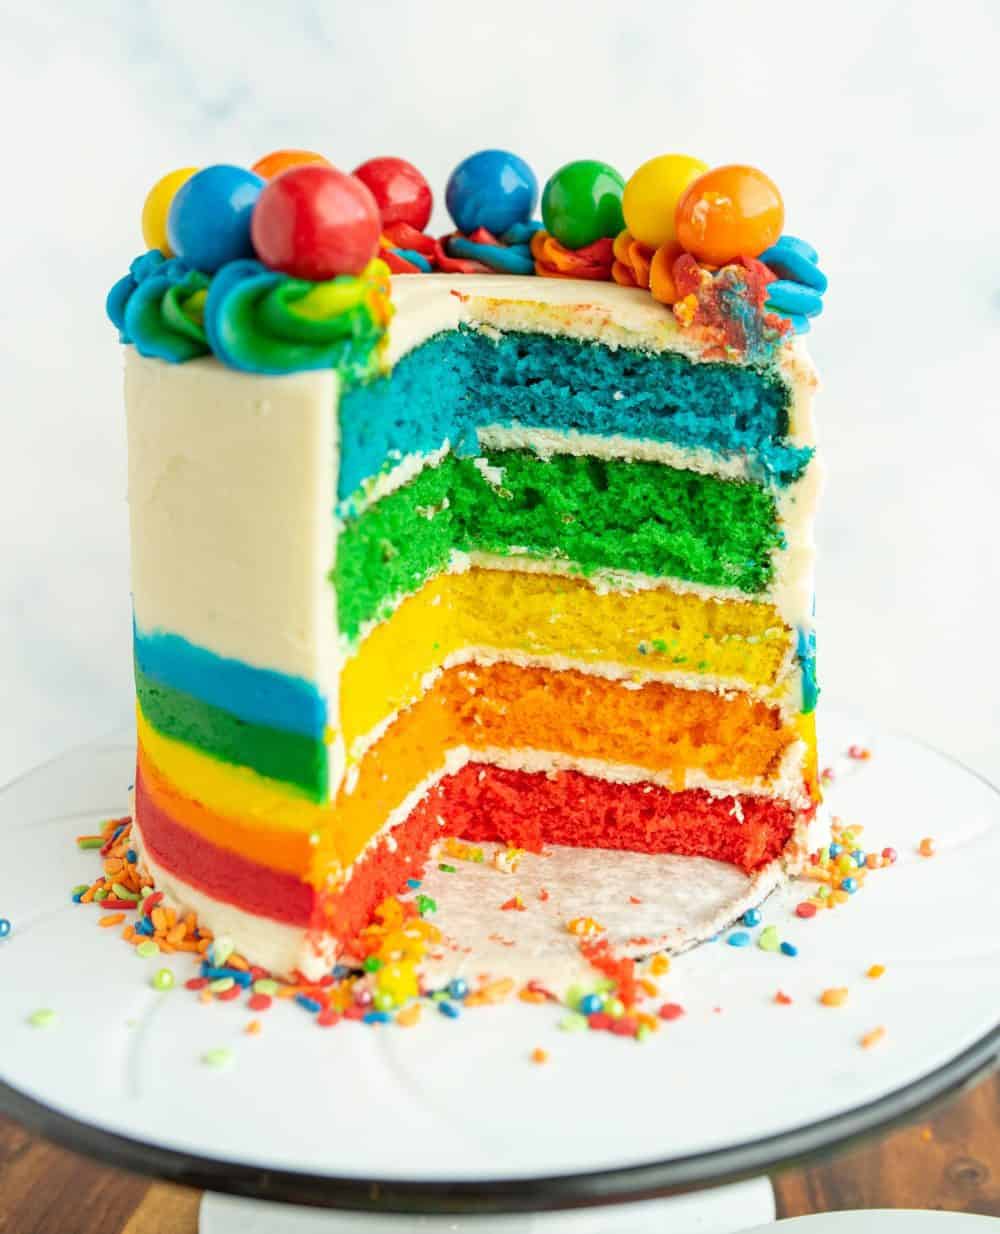 How do I achieve vibrant colored icing? : r/cakedecorating